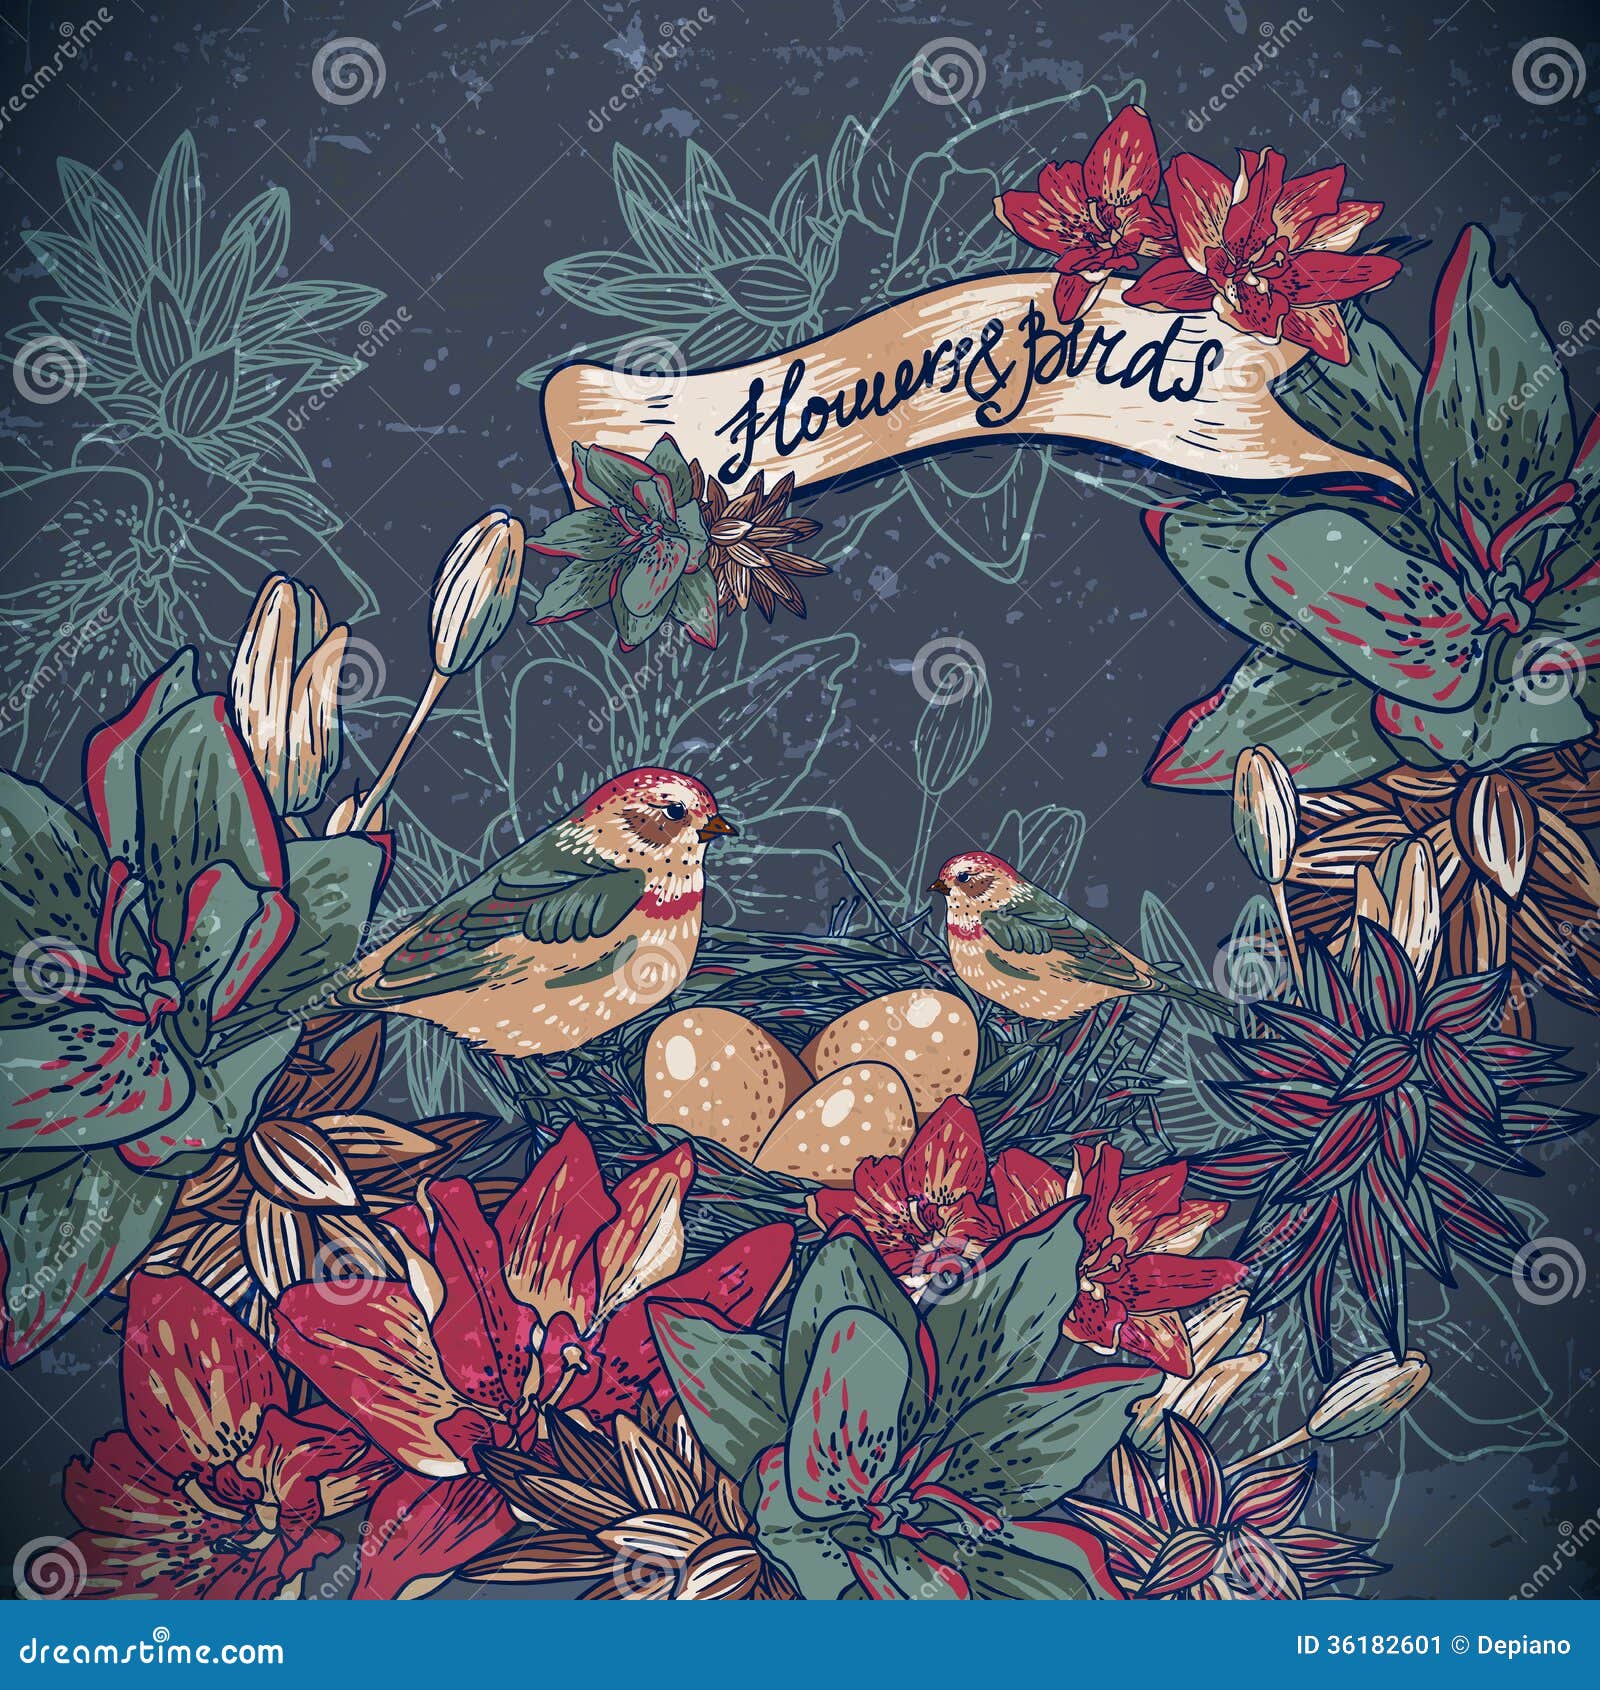 tumblr backgrounds html Gallery Vintage Birds   Backgrounds Viewing